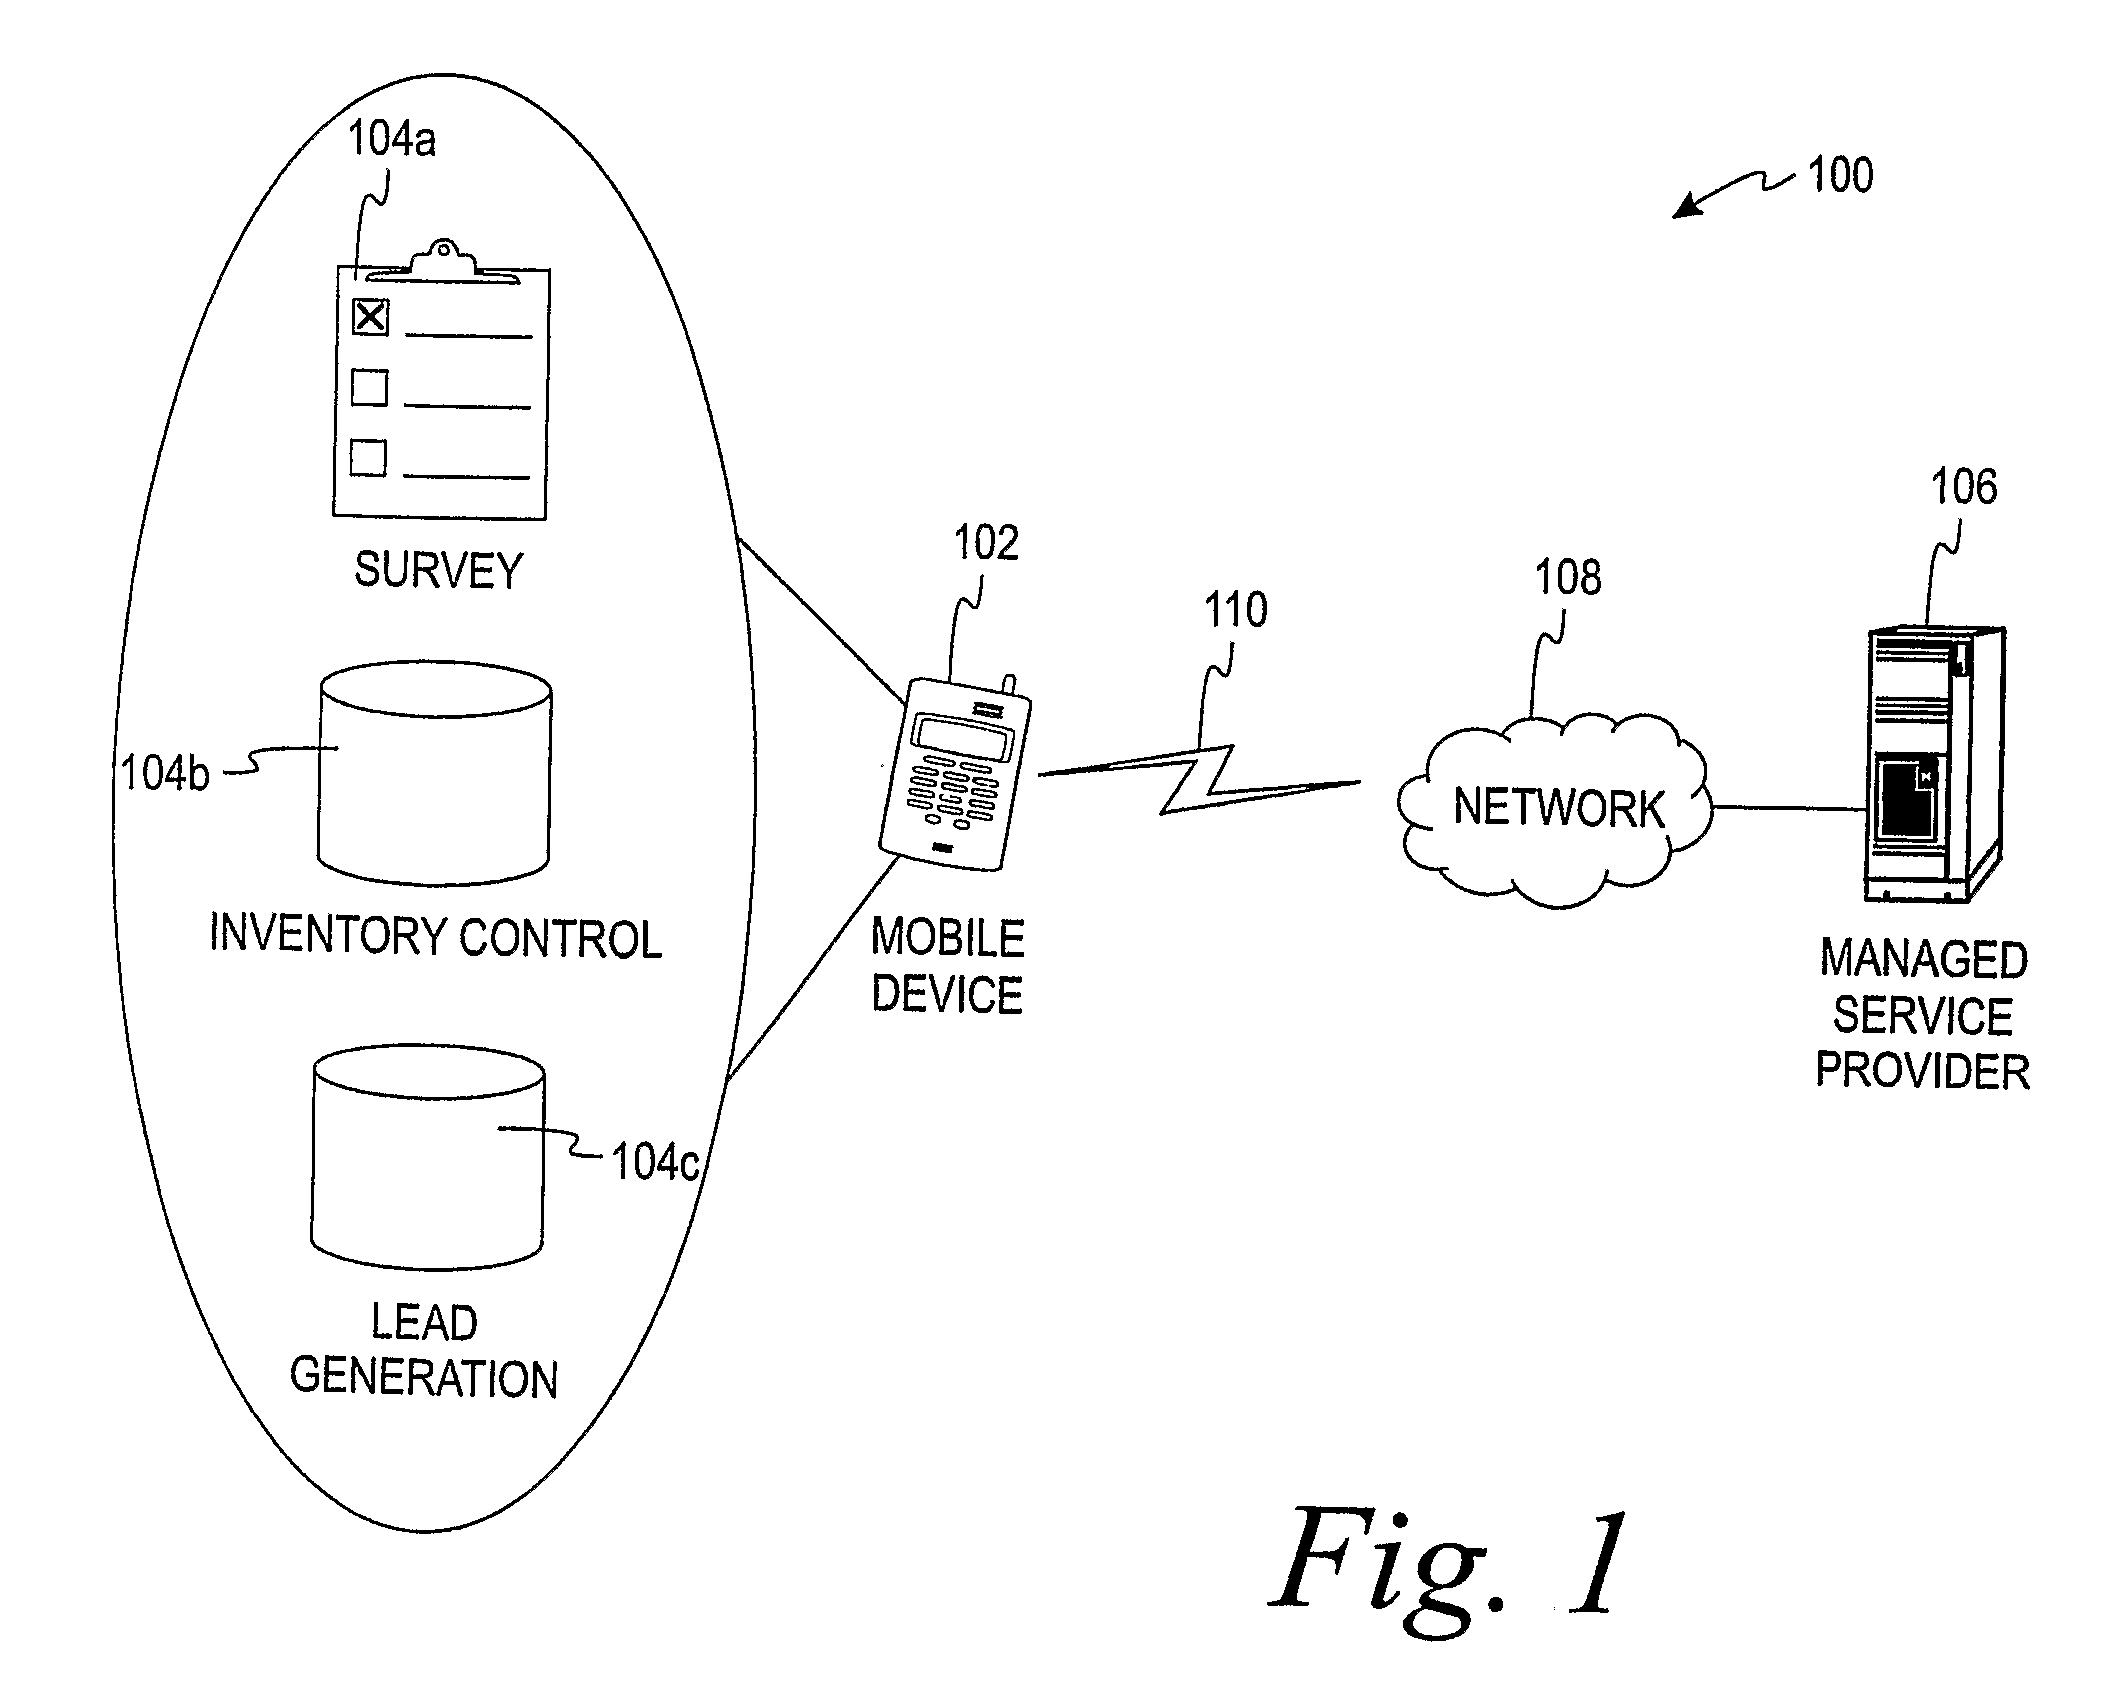 Methods and system for orchestrating services and data sharing on mobile devices